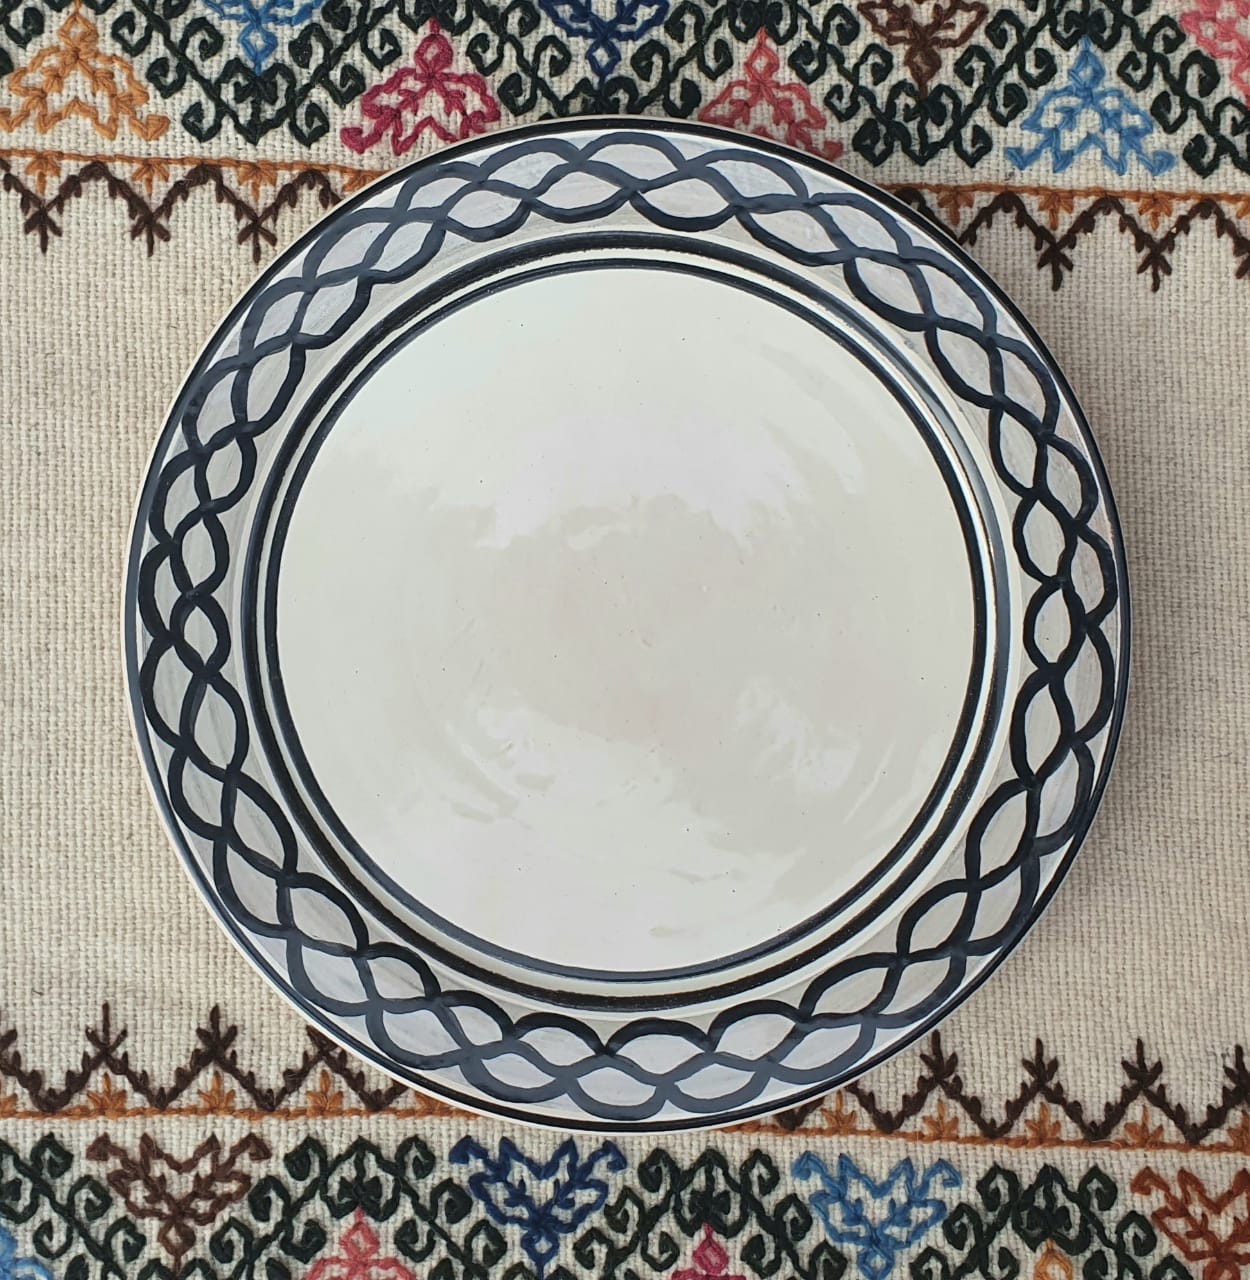 Plate with snake circles border Black and White